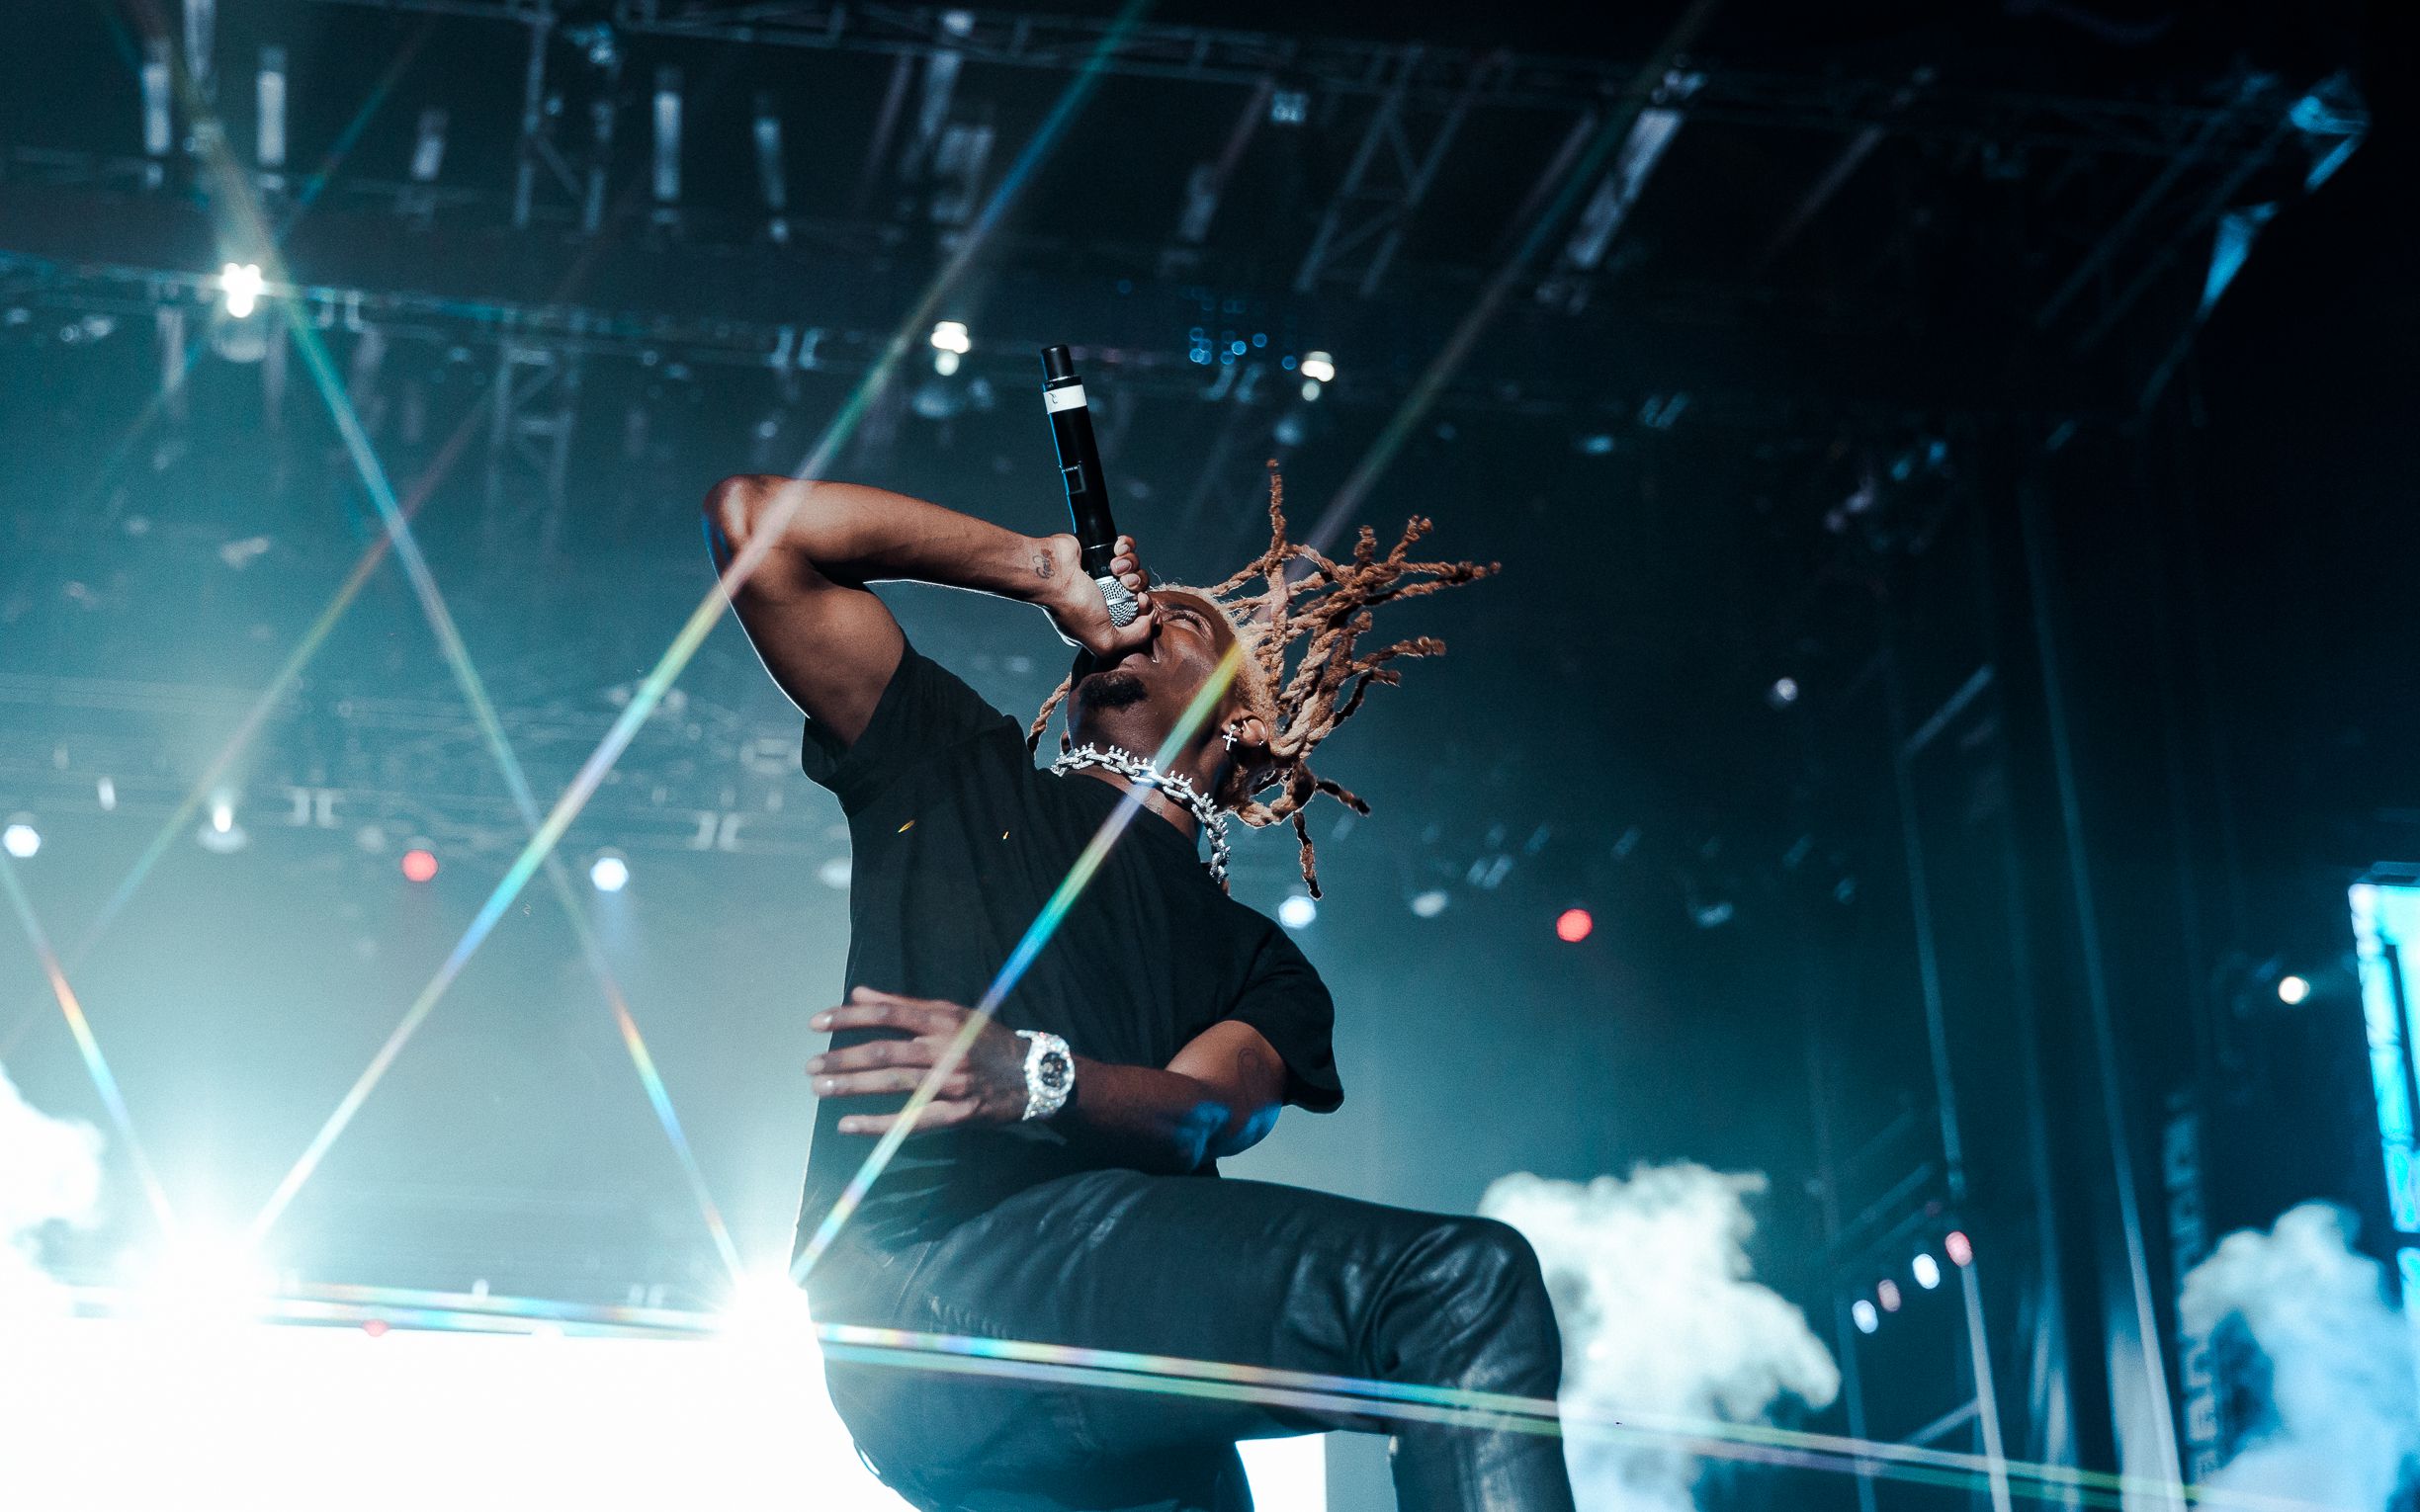 Houston Authorities Are Reviewing Arena Videos of Riot Caused By Playboi Carti’s Last Minute Cancellation